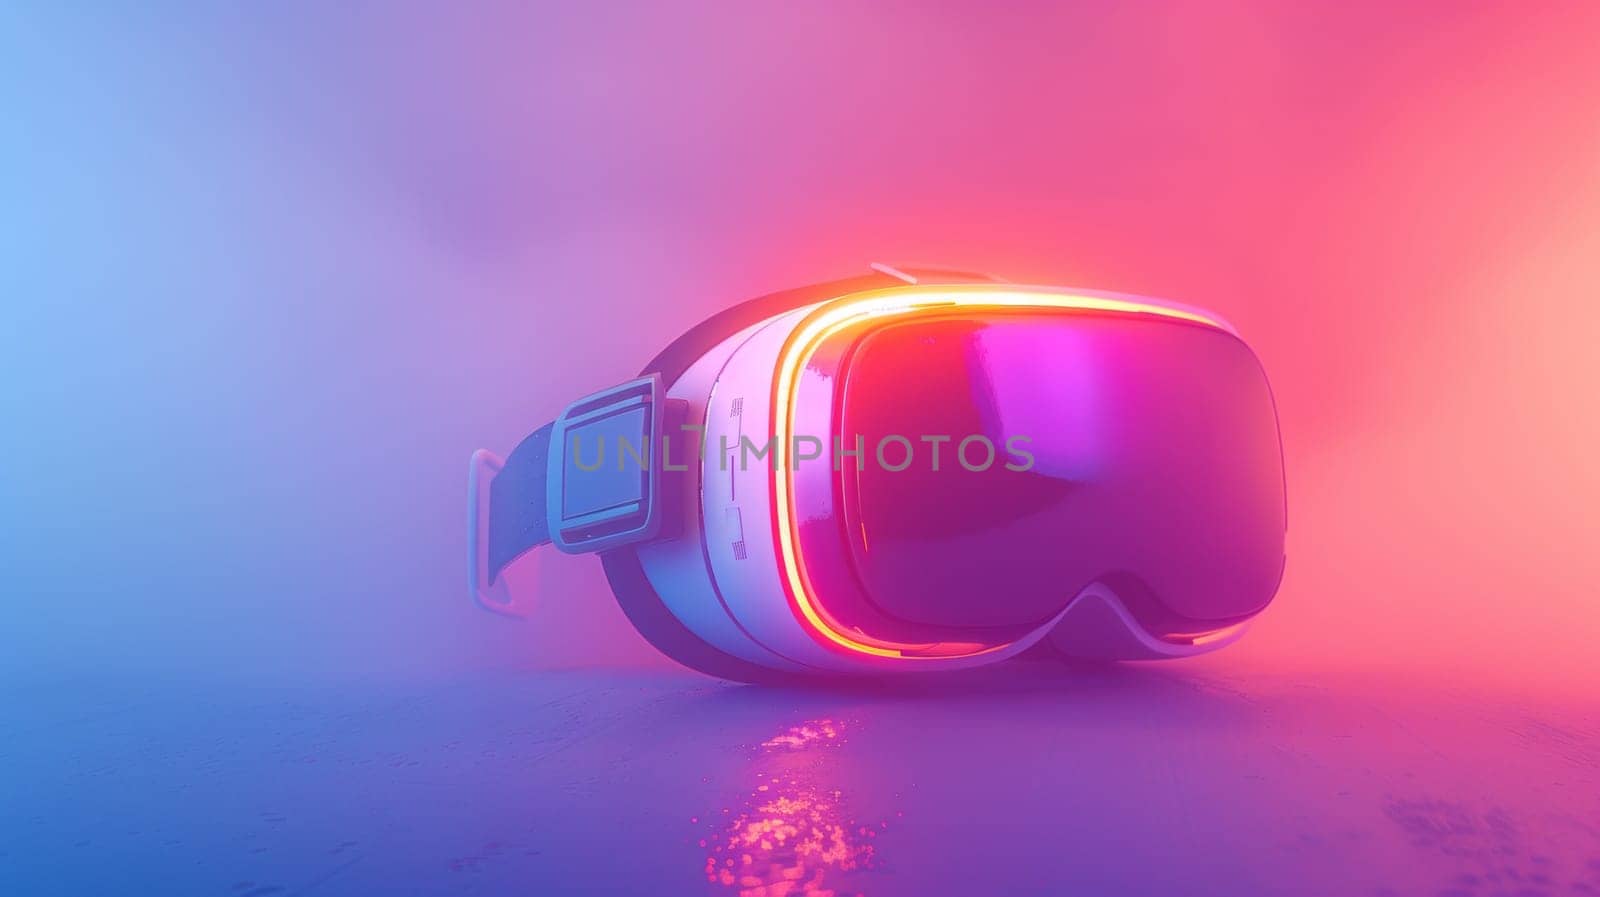 A close up of a pair of goggles on top of some foggy background